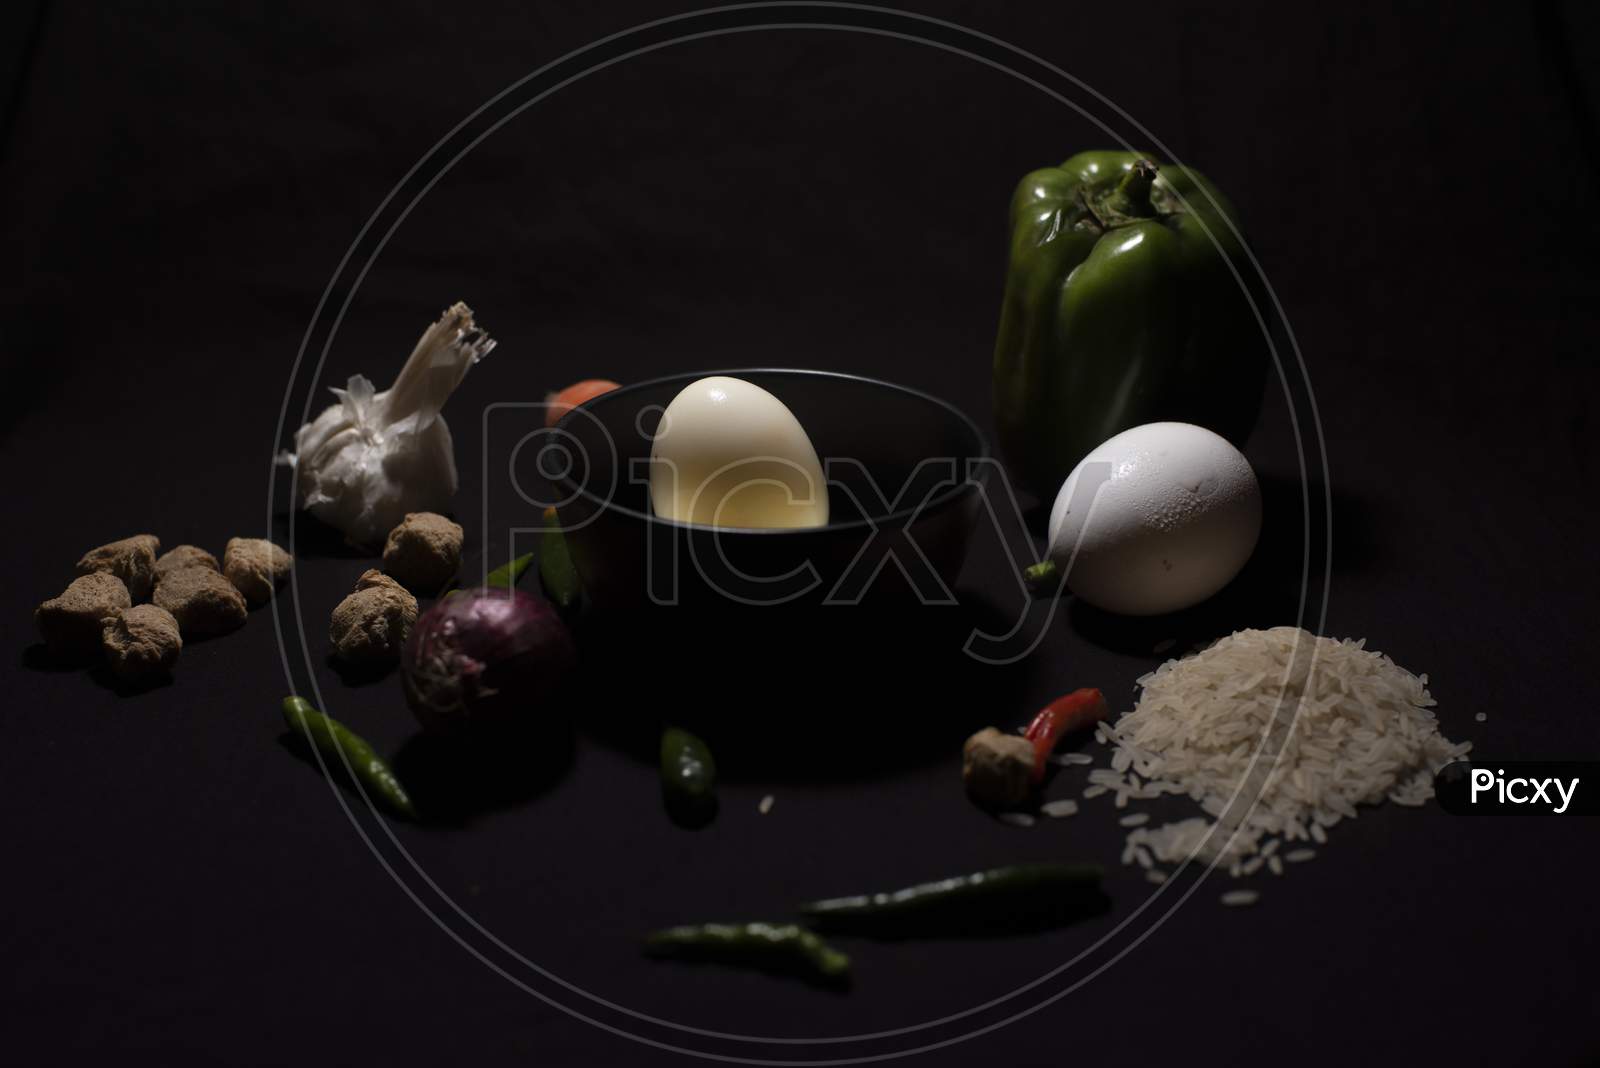 Boiled Eggs In A Bowl Decorated With Cereals And Vegetables In Dark Copy Space Background. Food And Product Photography.